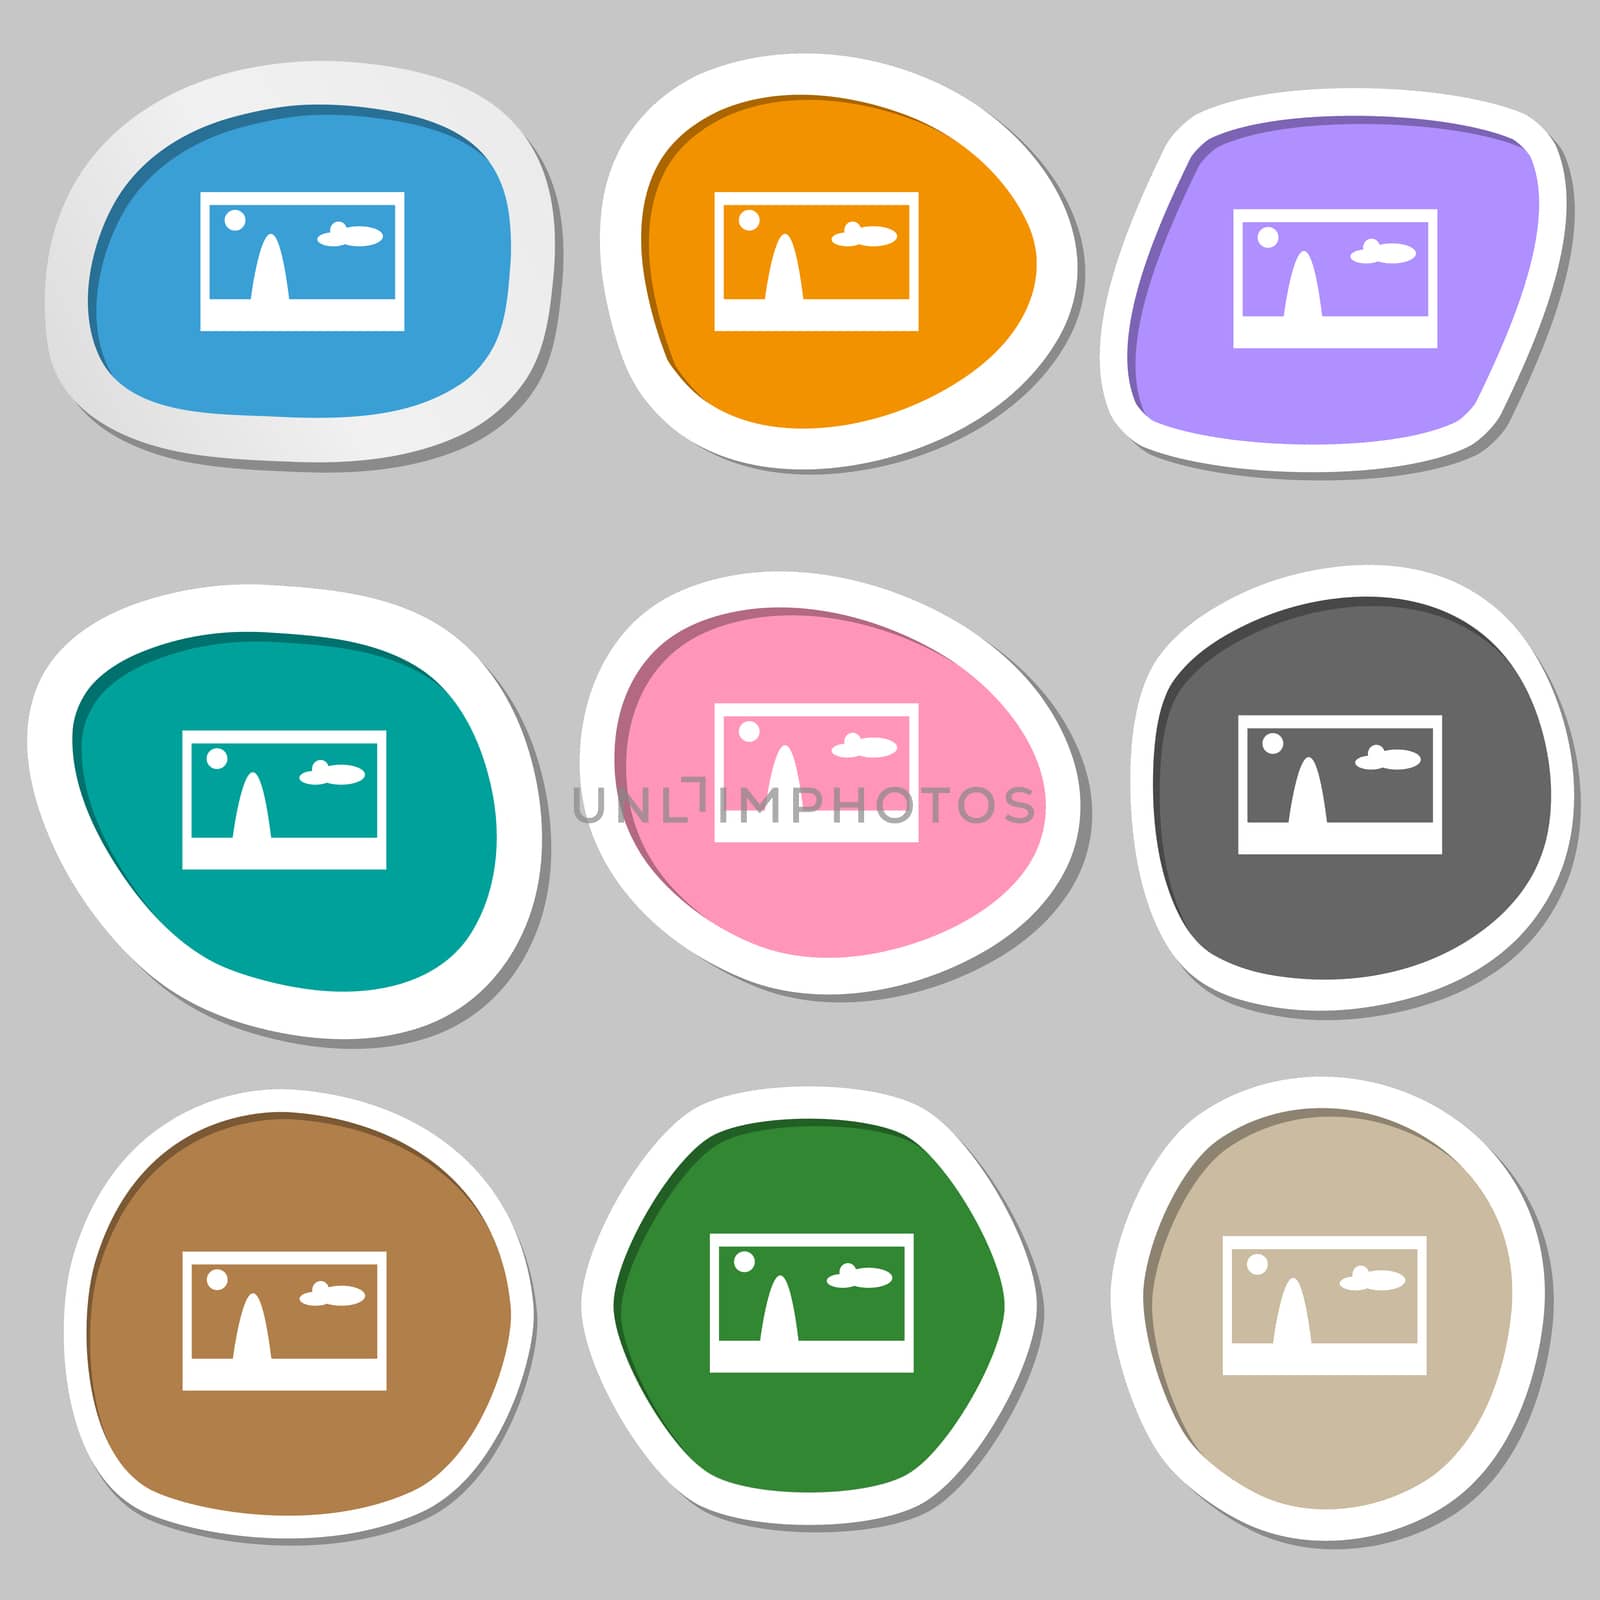 File JPG sign icon. Download image file symbol. Multicolored paper stickers.  by serhii_lohvyniuk